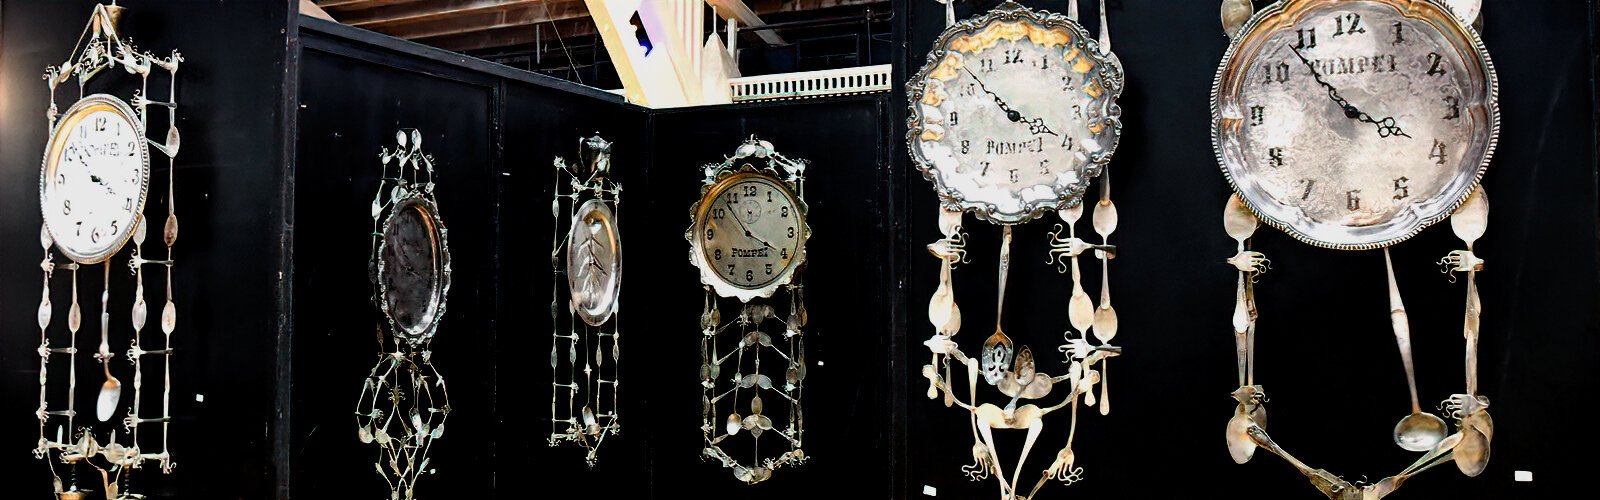 Created from silverware and metal by hand forming, soldering and welding, the unique clocks of sculptor Vincent Pompei keep good track of time at PAVA’s Cool Art Show.